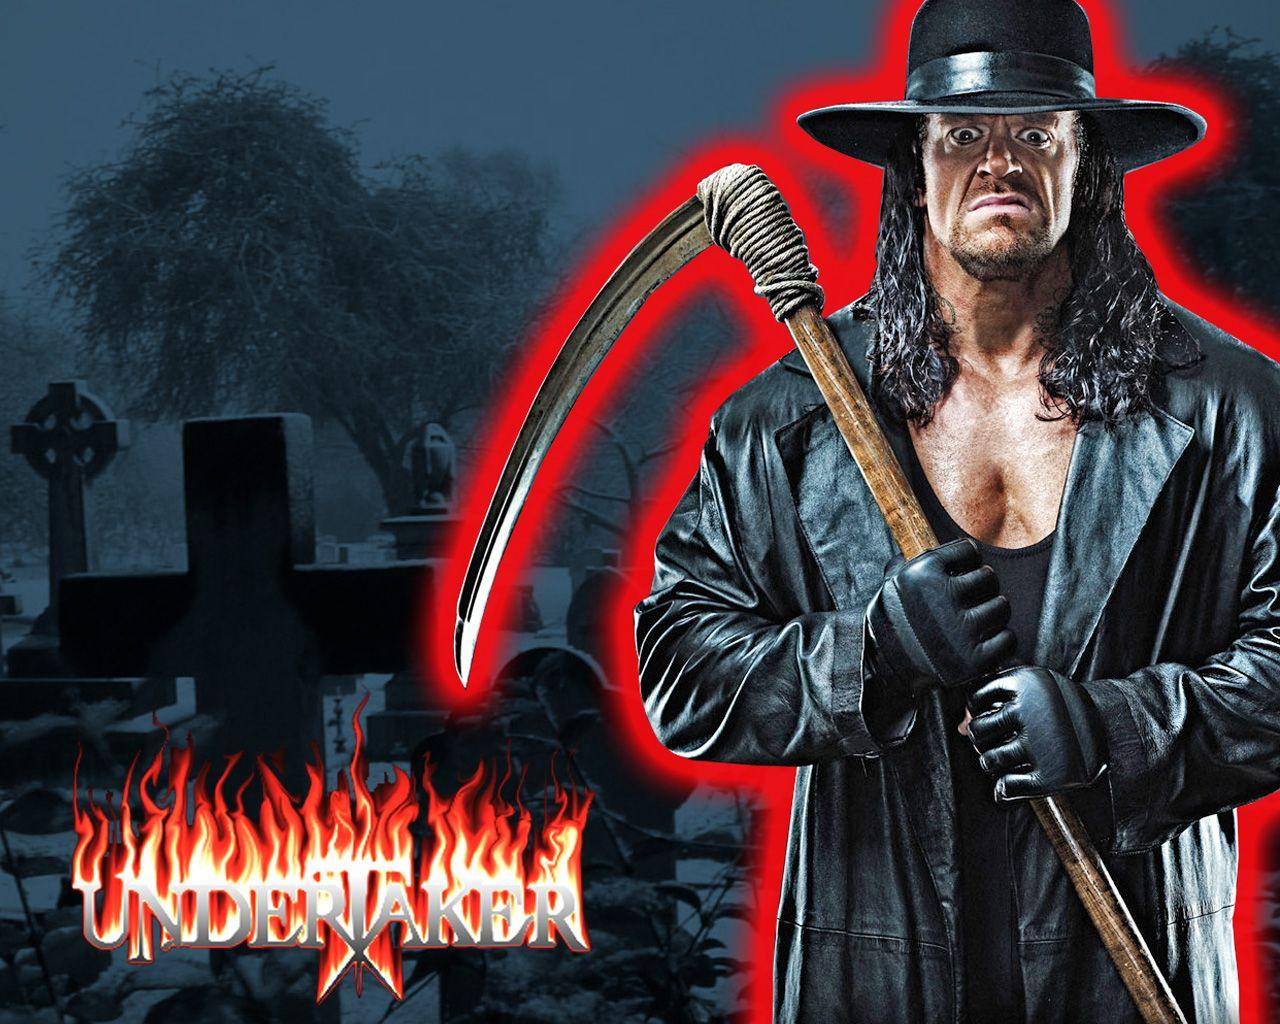 Undertaker image the taker HD wallpaper and background photo